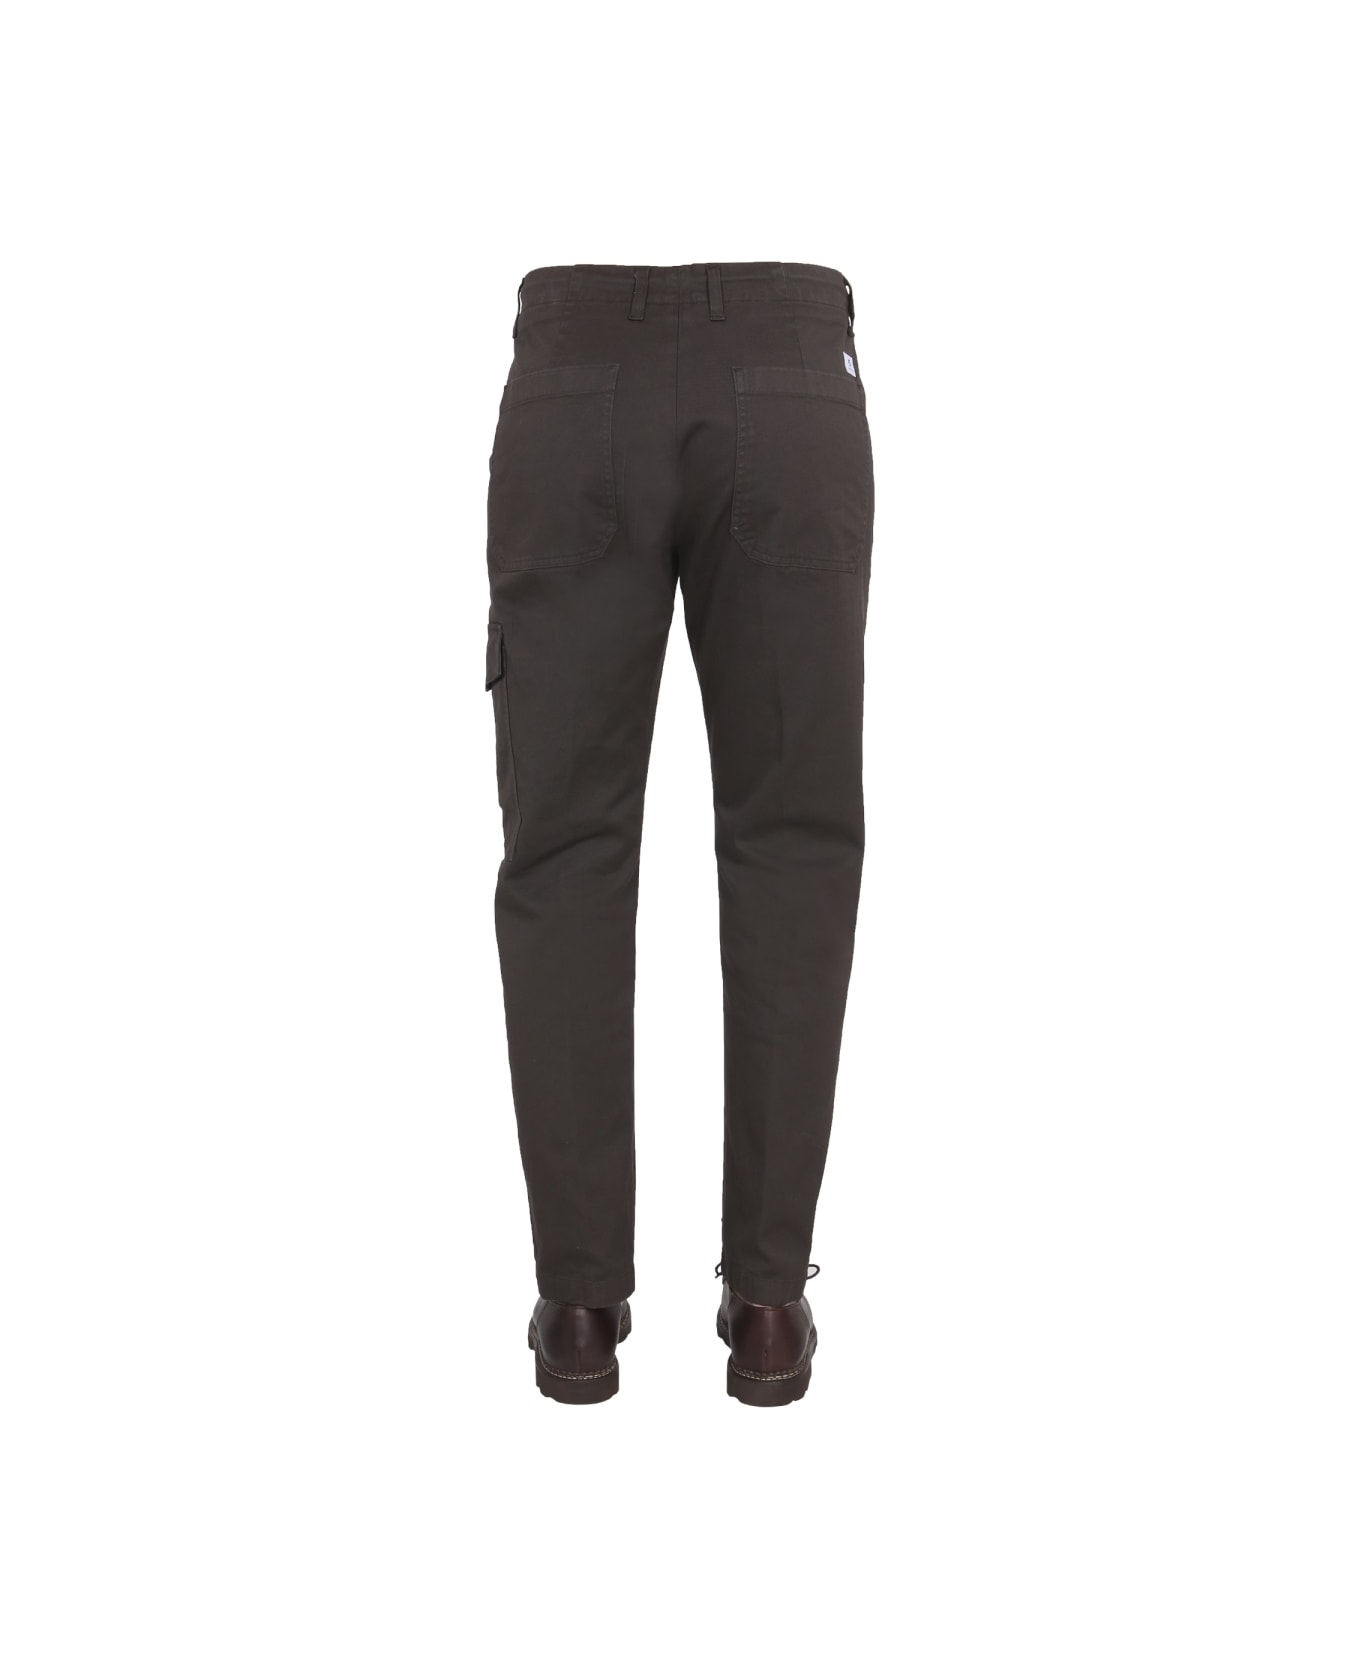 Department Five Pants Out - BROWN